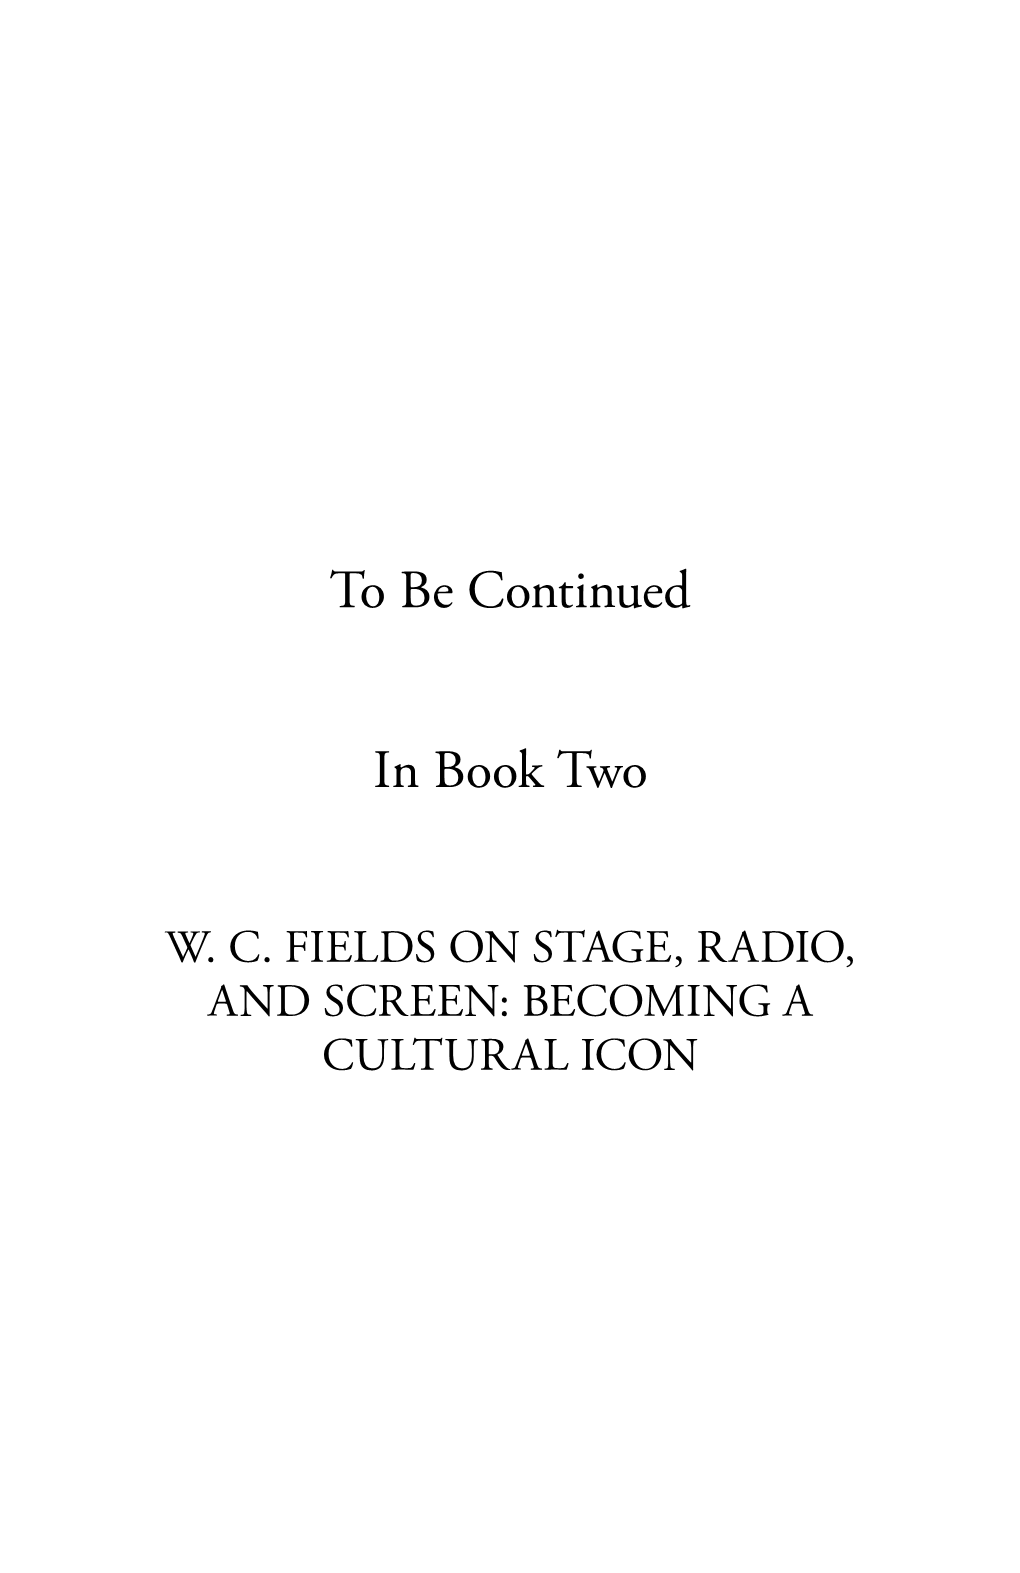 To Be Continued in Book